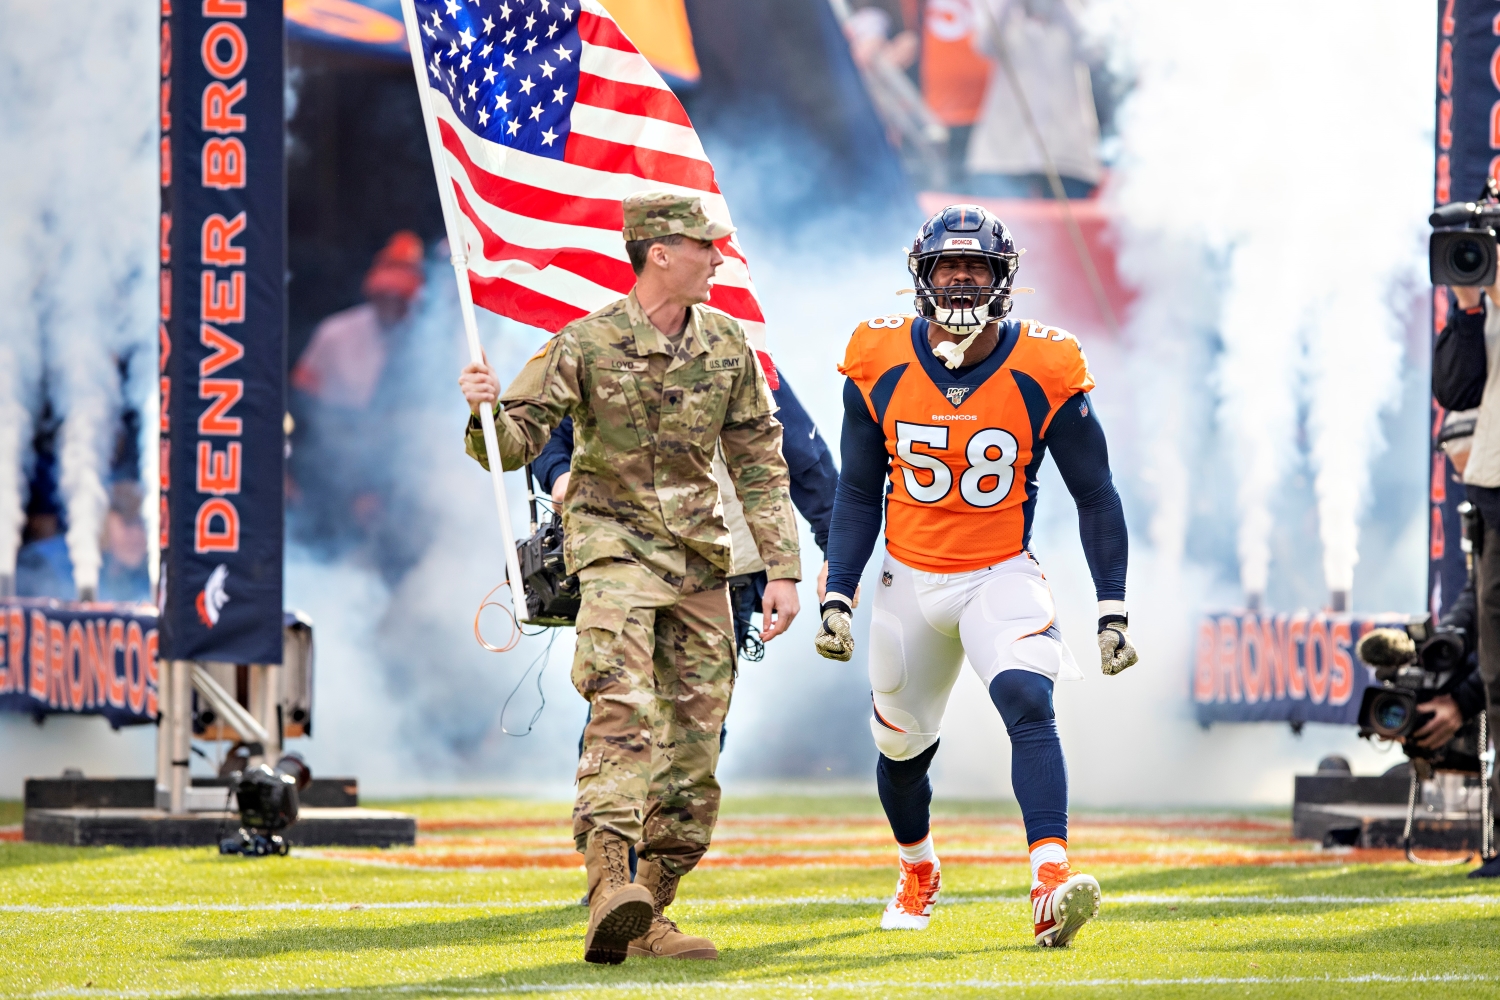 Denver Broncos linebacker Von Miller runs onto the field before a game while accompanied by a U.S. soldier.